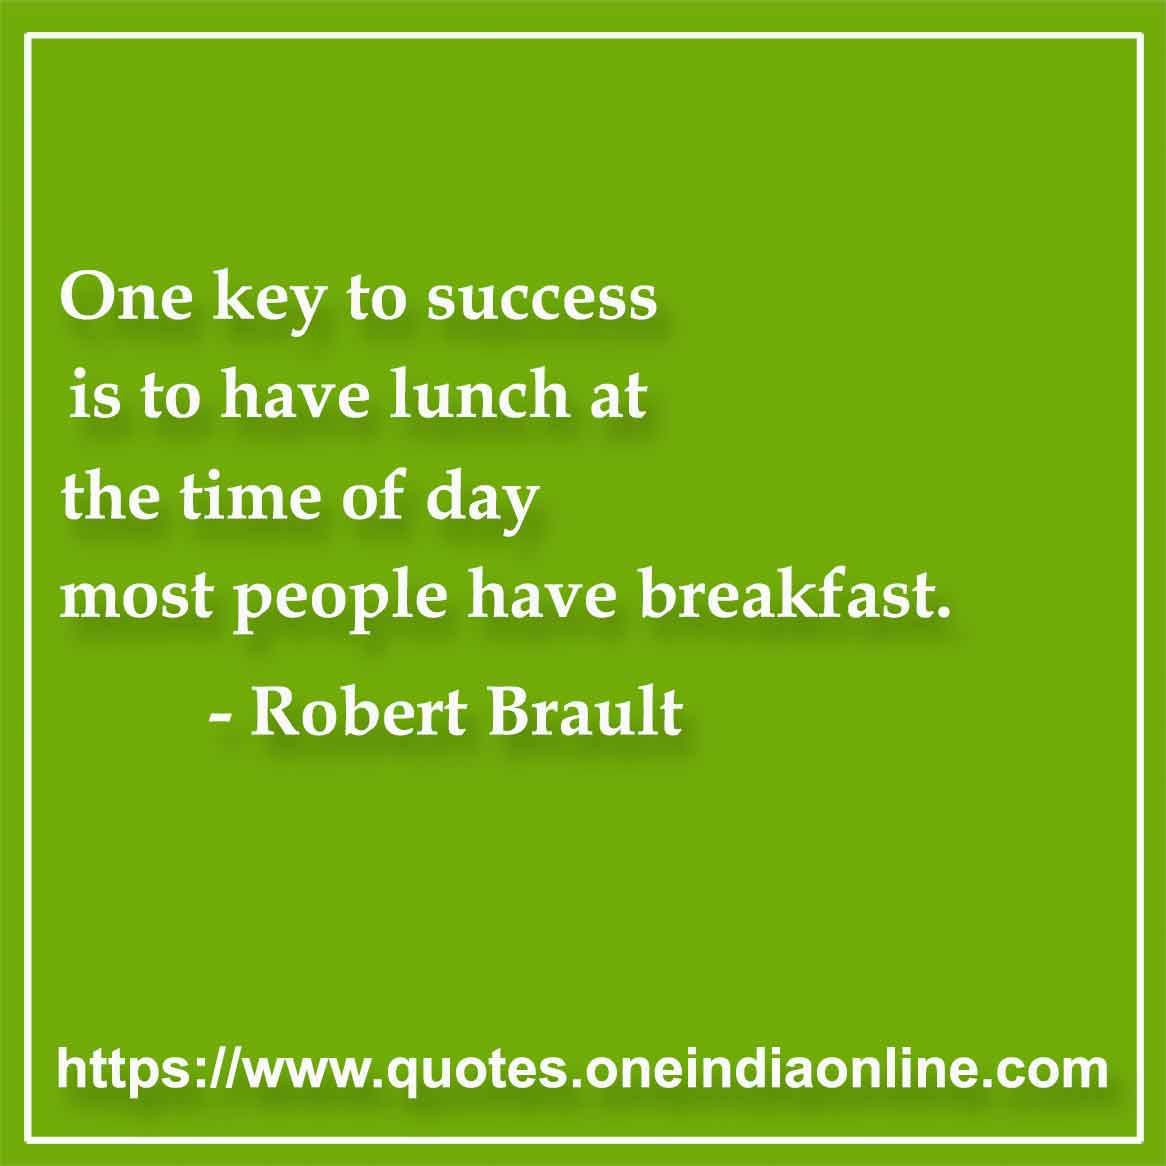 One key to success is to have lunch at the time of day most people have breakfast. 

- Robert Brault